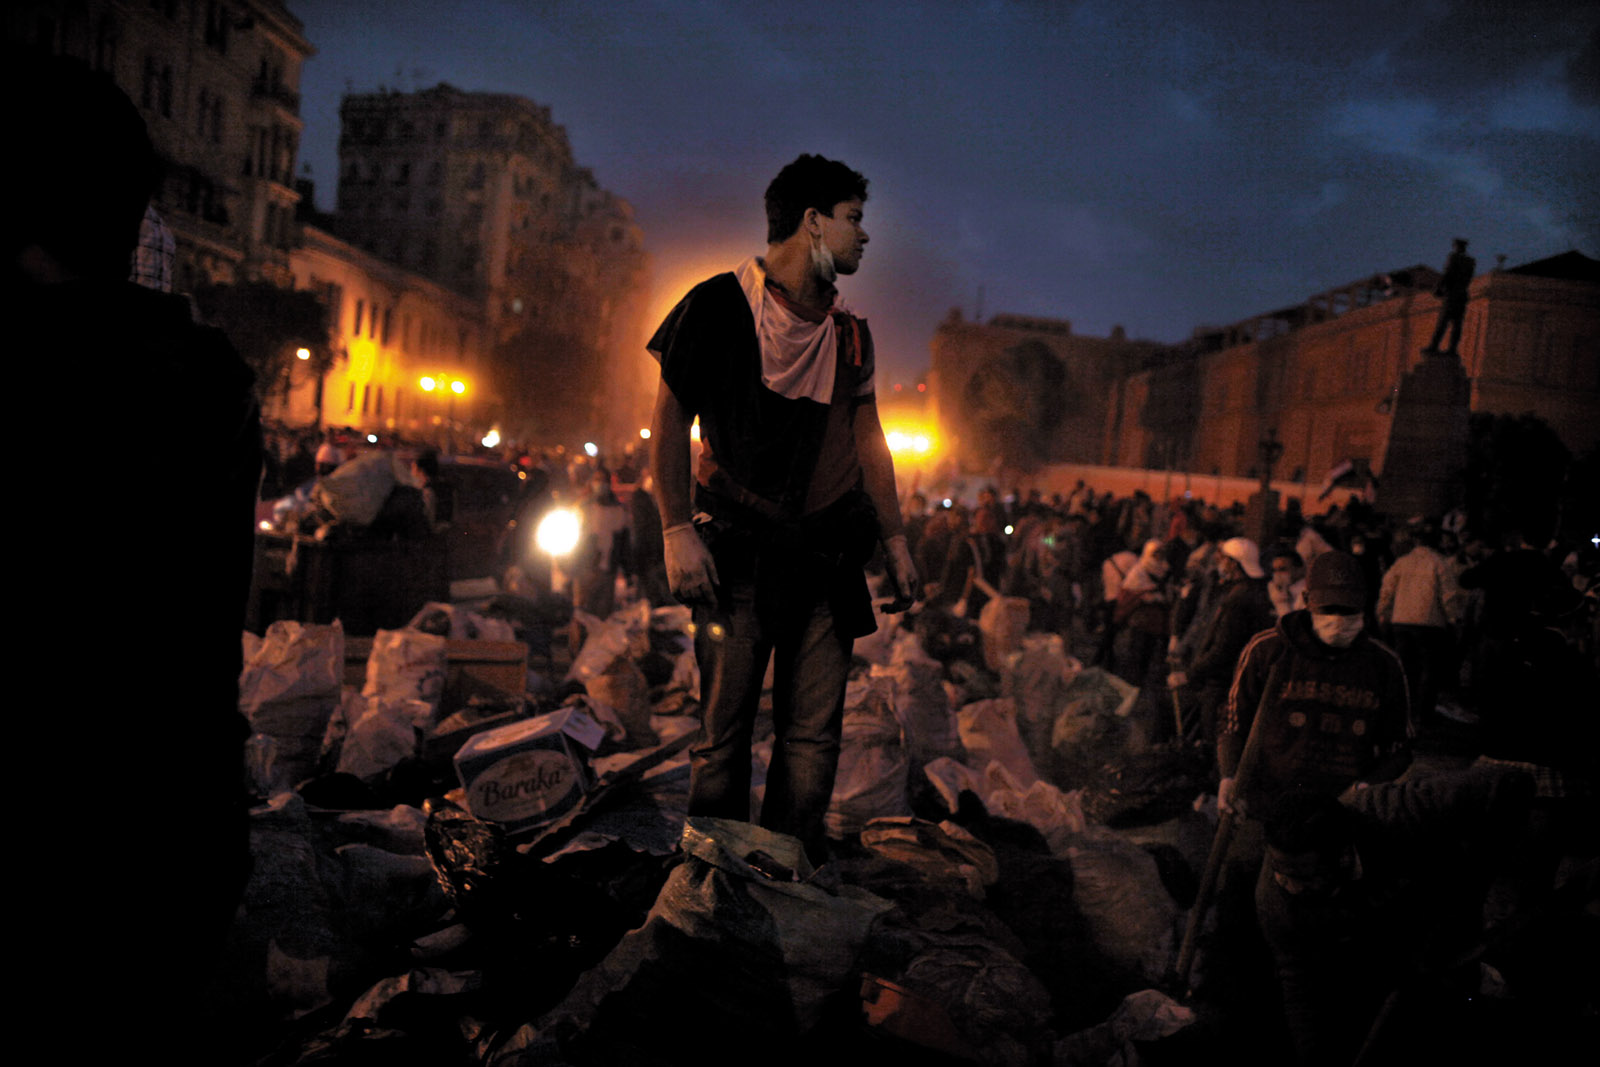 Volunteers clearing trash and debris from Tahrir Square, Cairo, February 2011